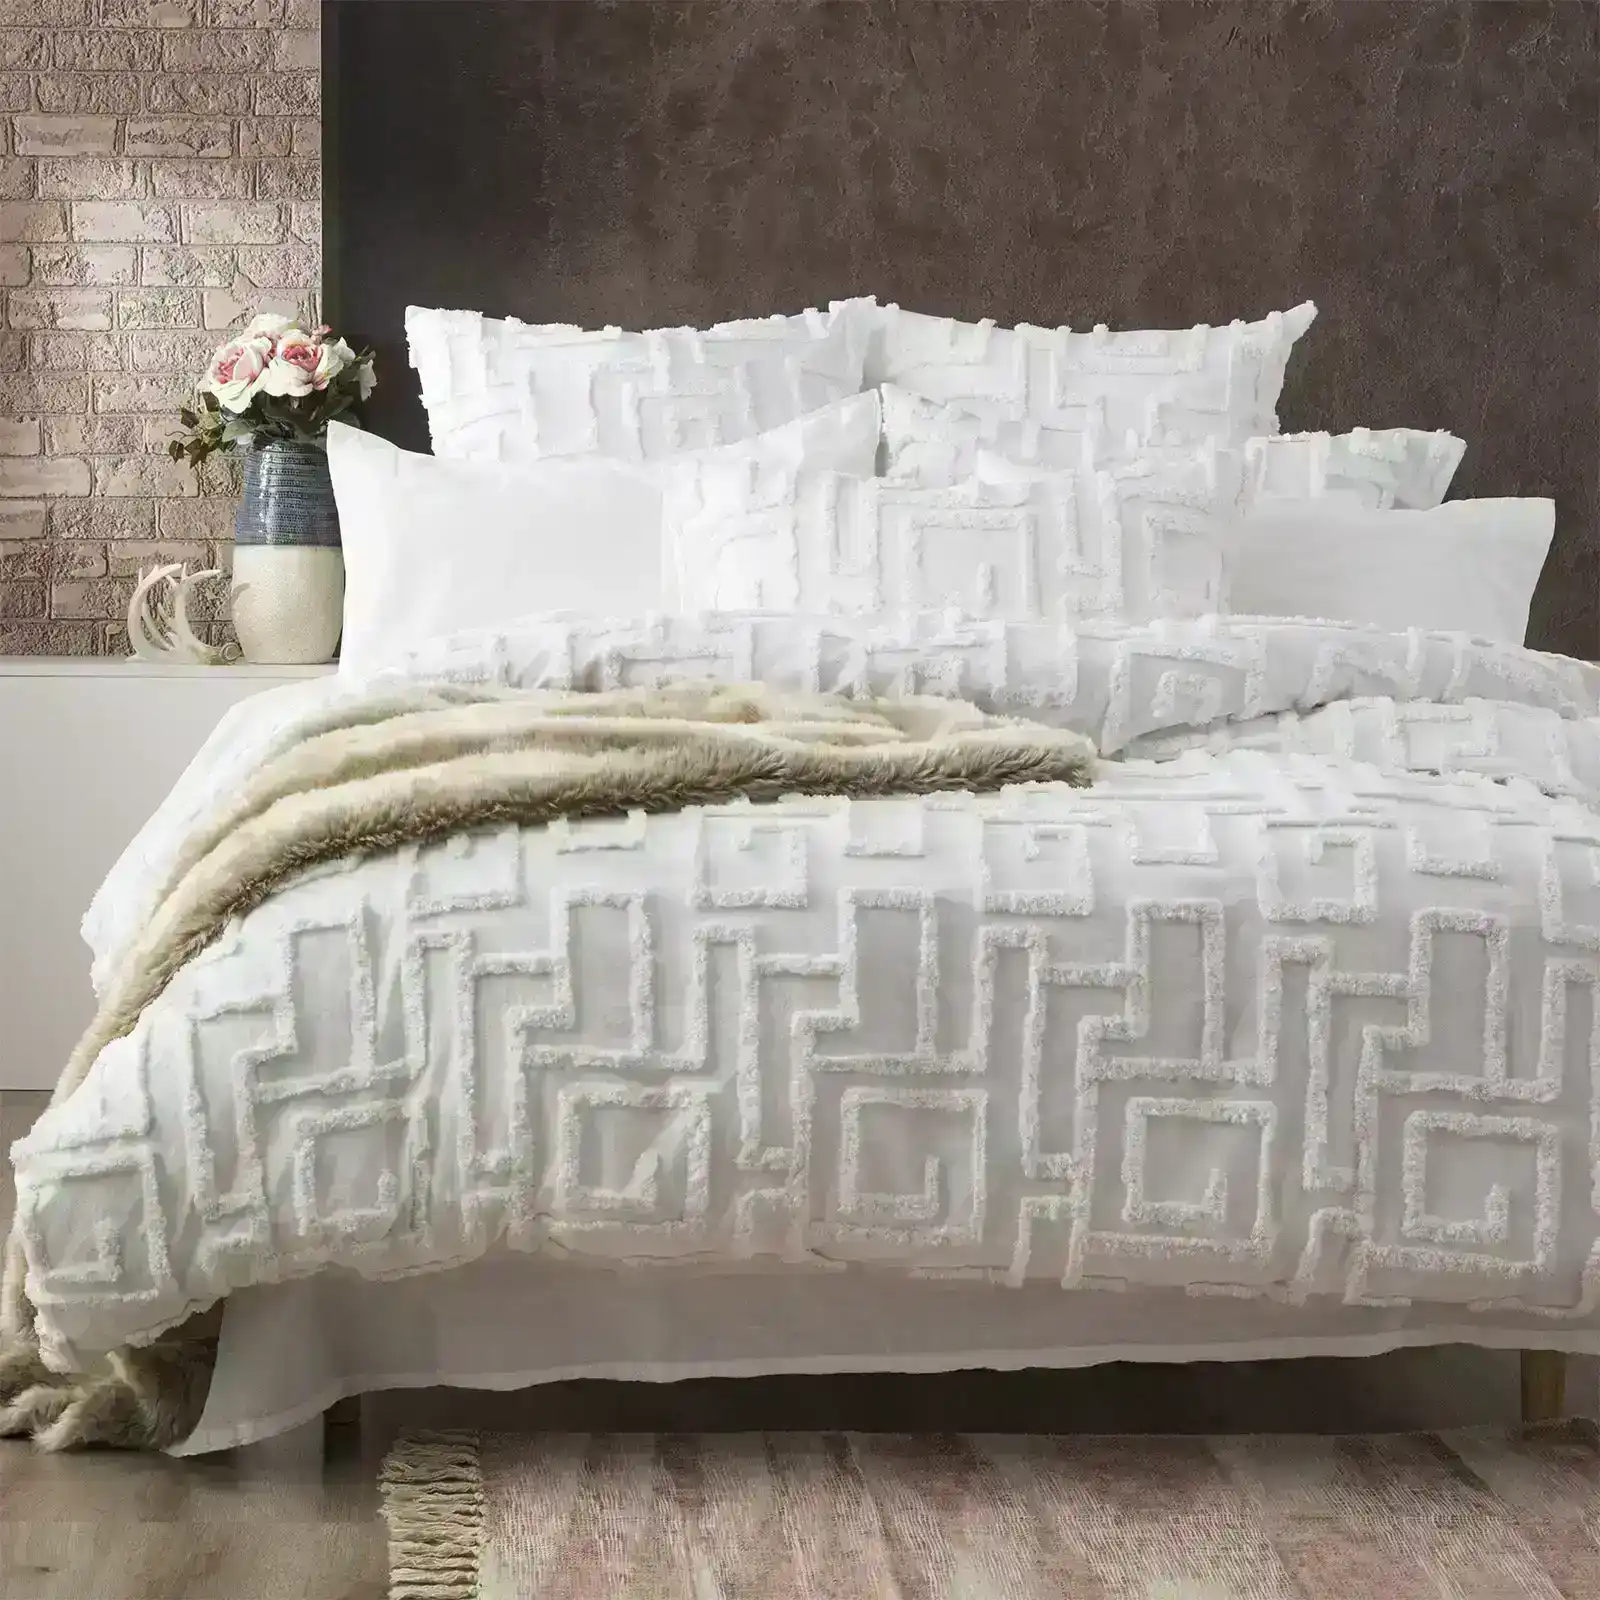 Renee Taylor Riley Queen Bed Quilt Cover VT Washed Cotton Chenille Tufted White